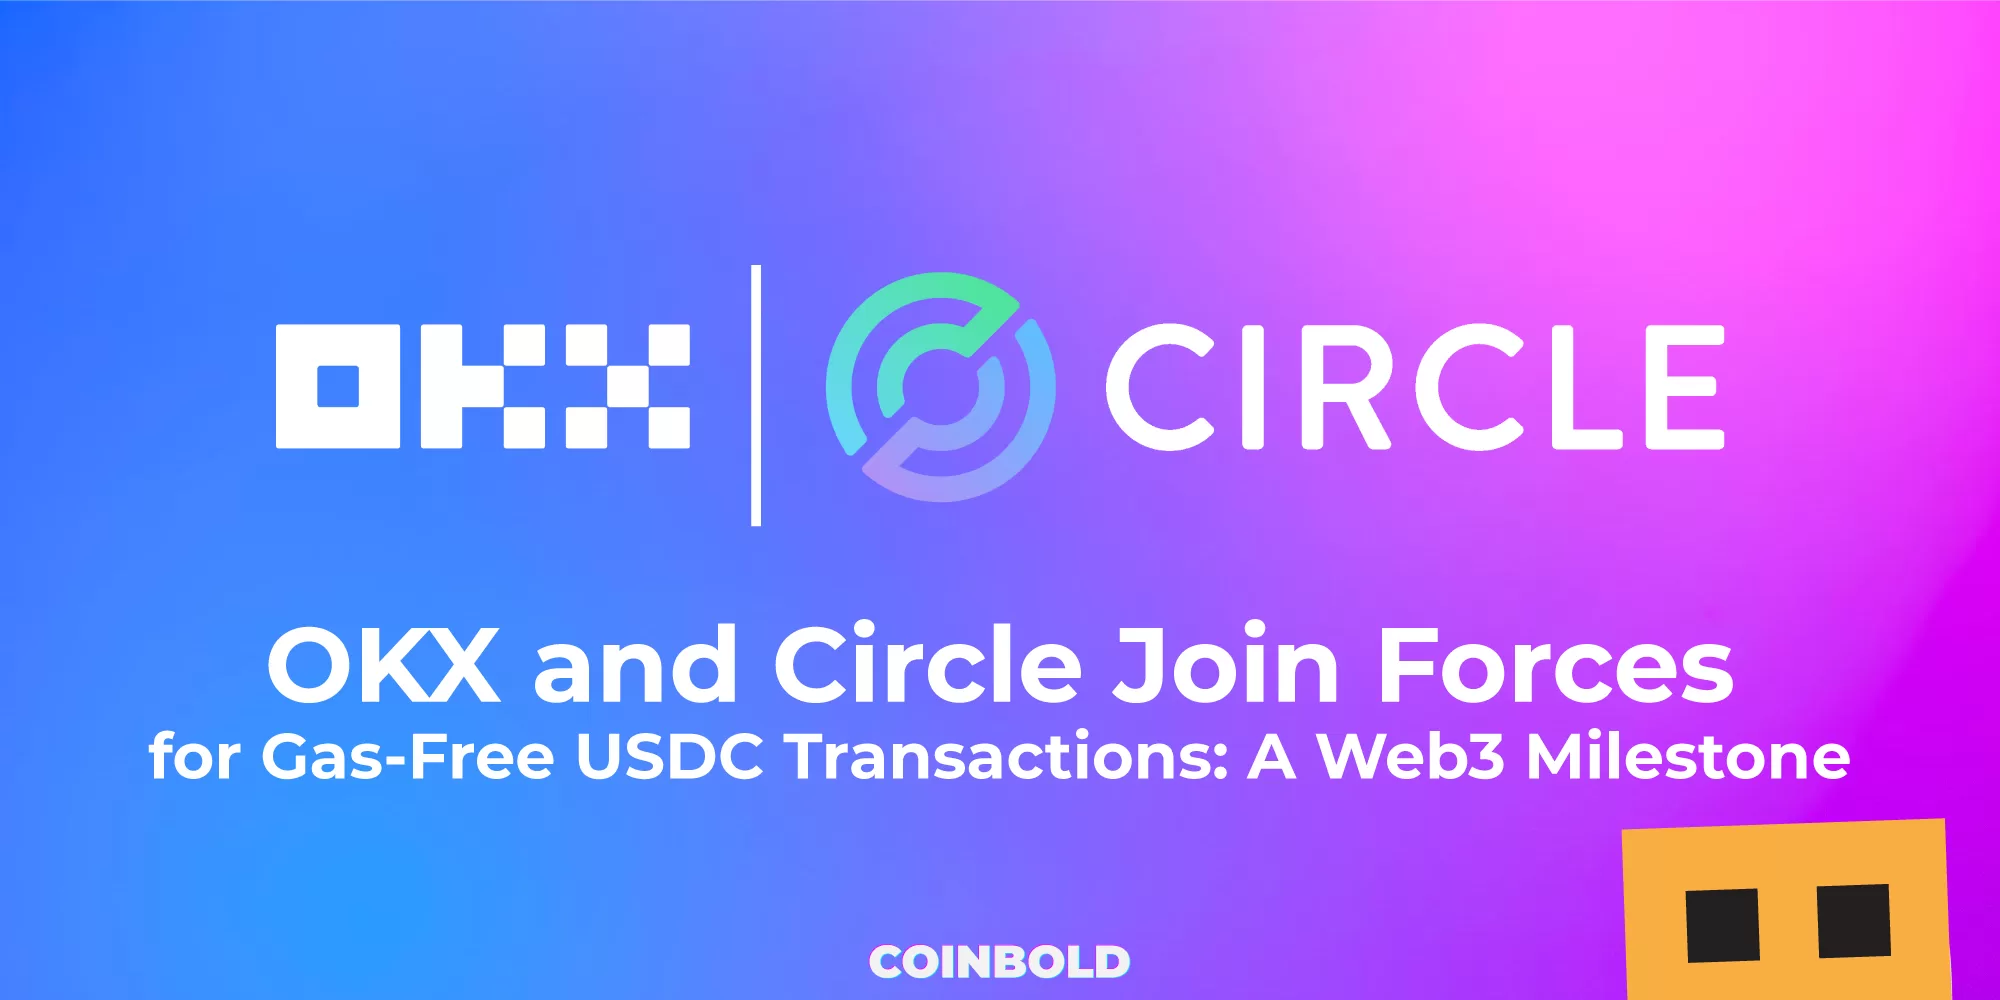 OKX and Circle Join Forces for Gas Free USDC Transactions A Web3 Milestone